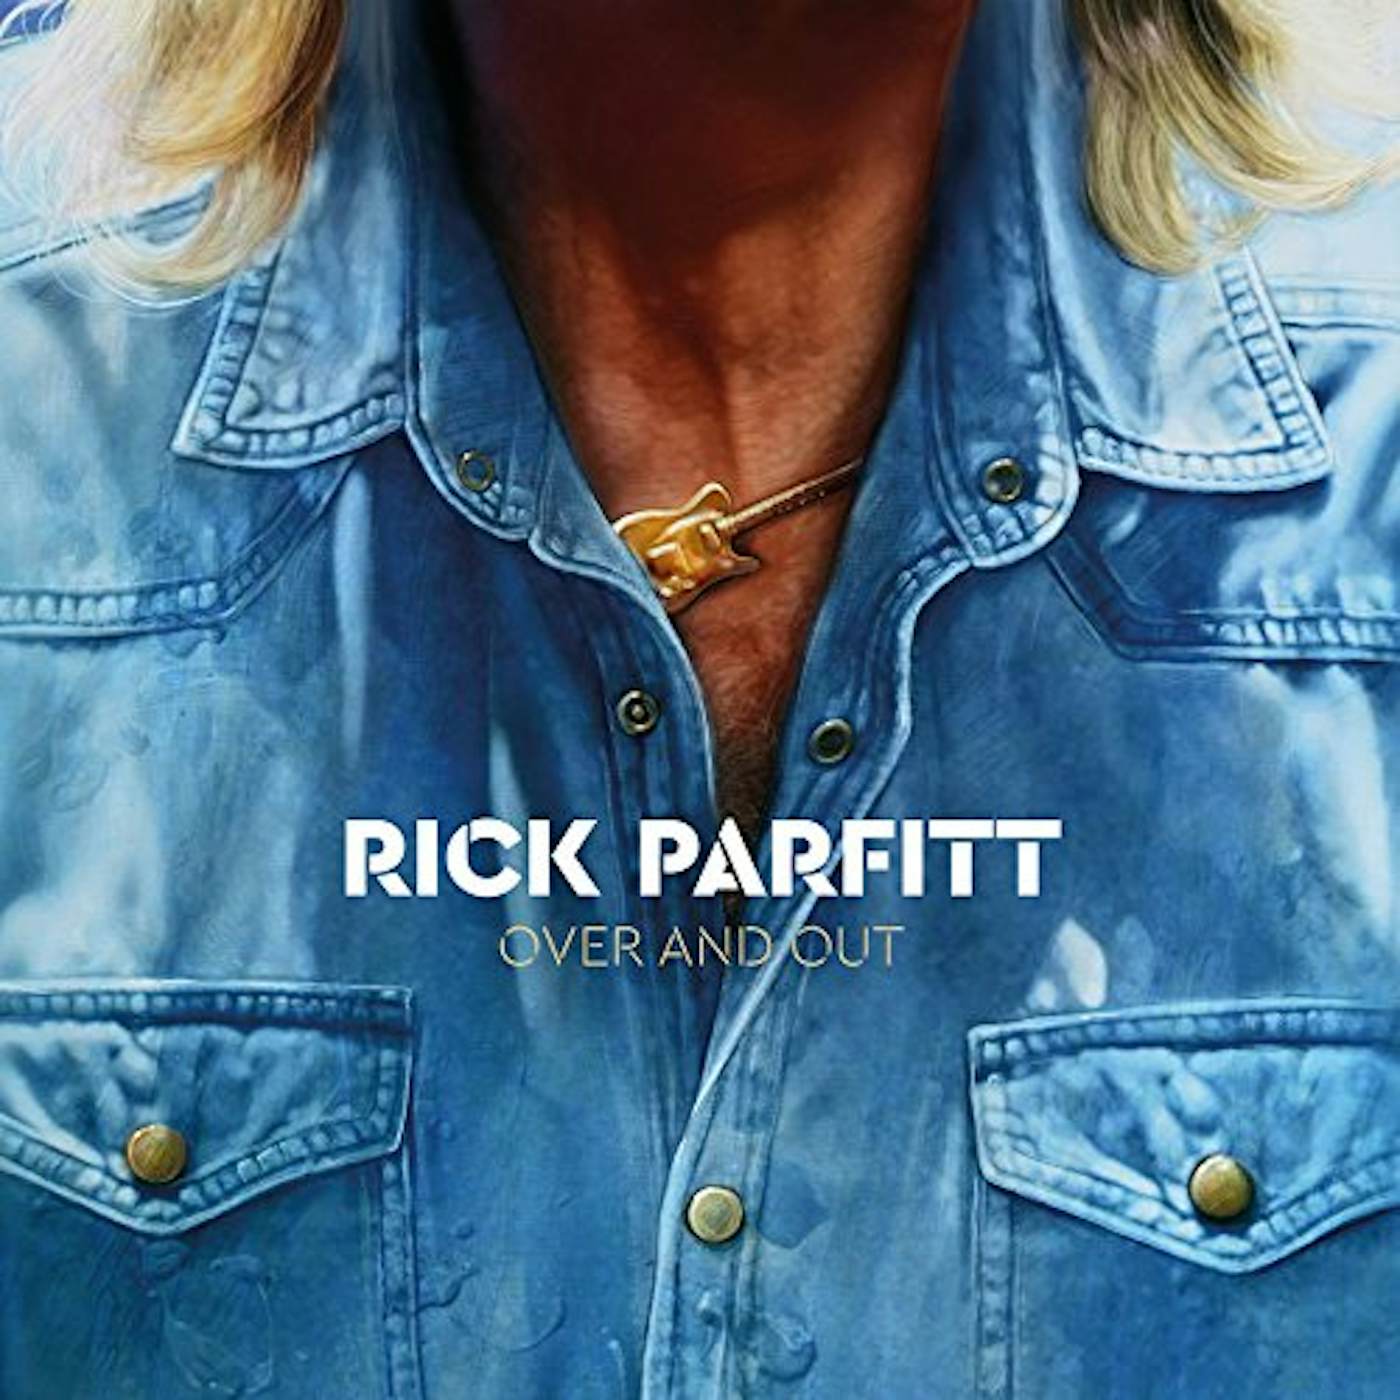 Rick Parfitt Over and Out Vinyl Record